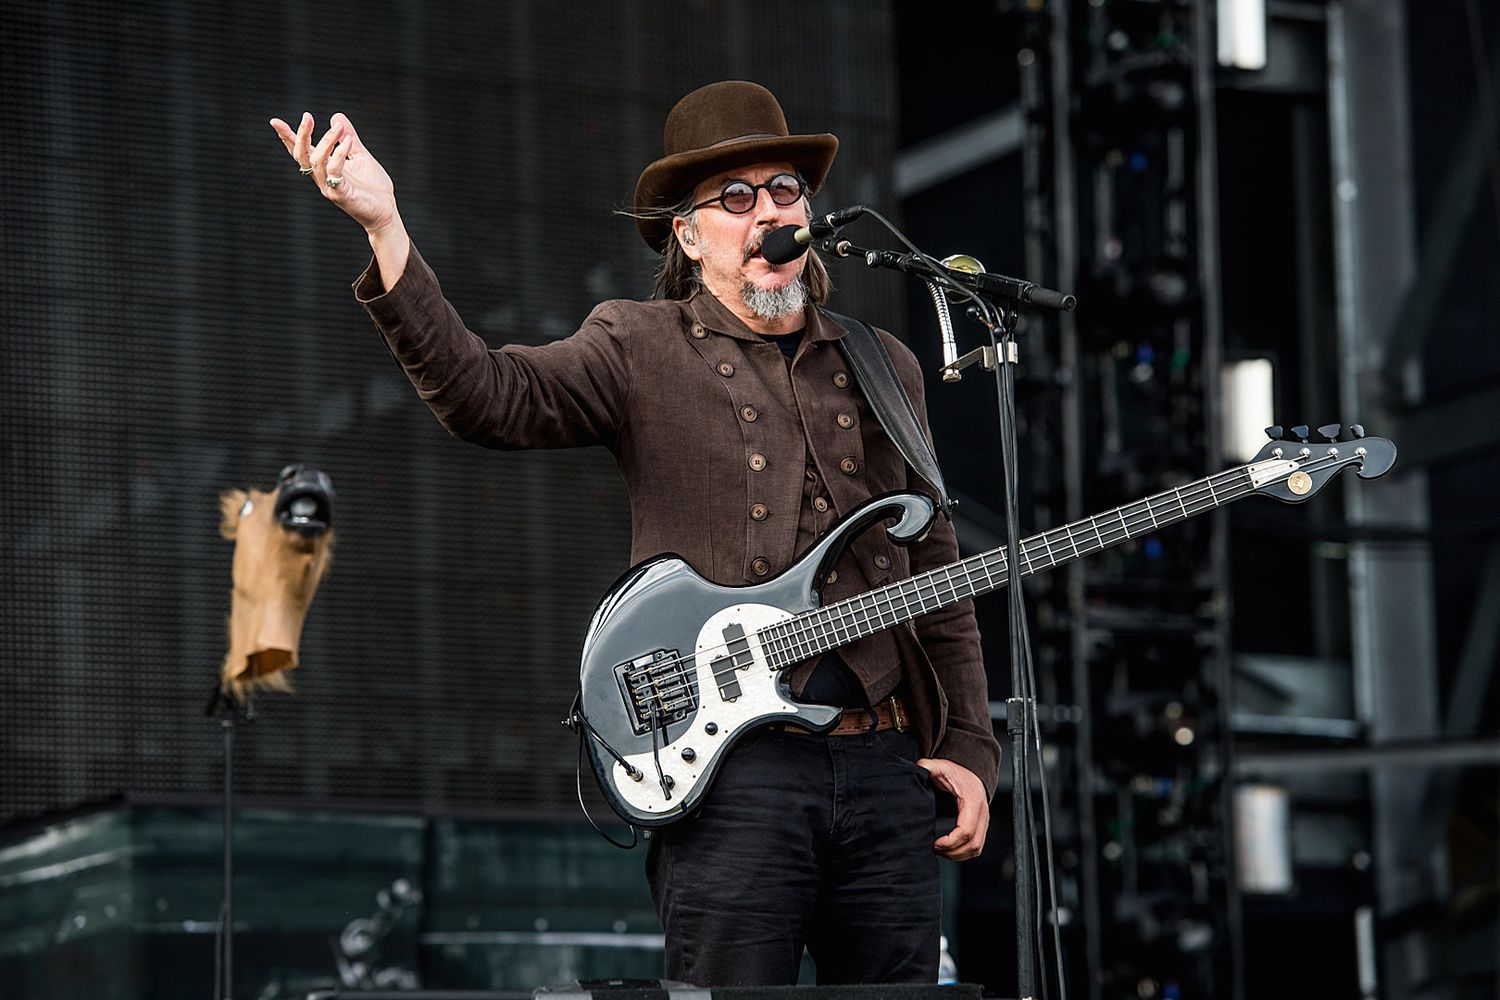 What Bass Does Les Claypool Play